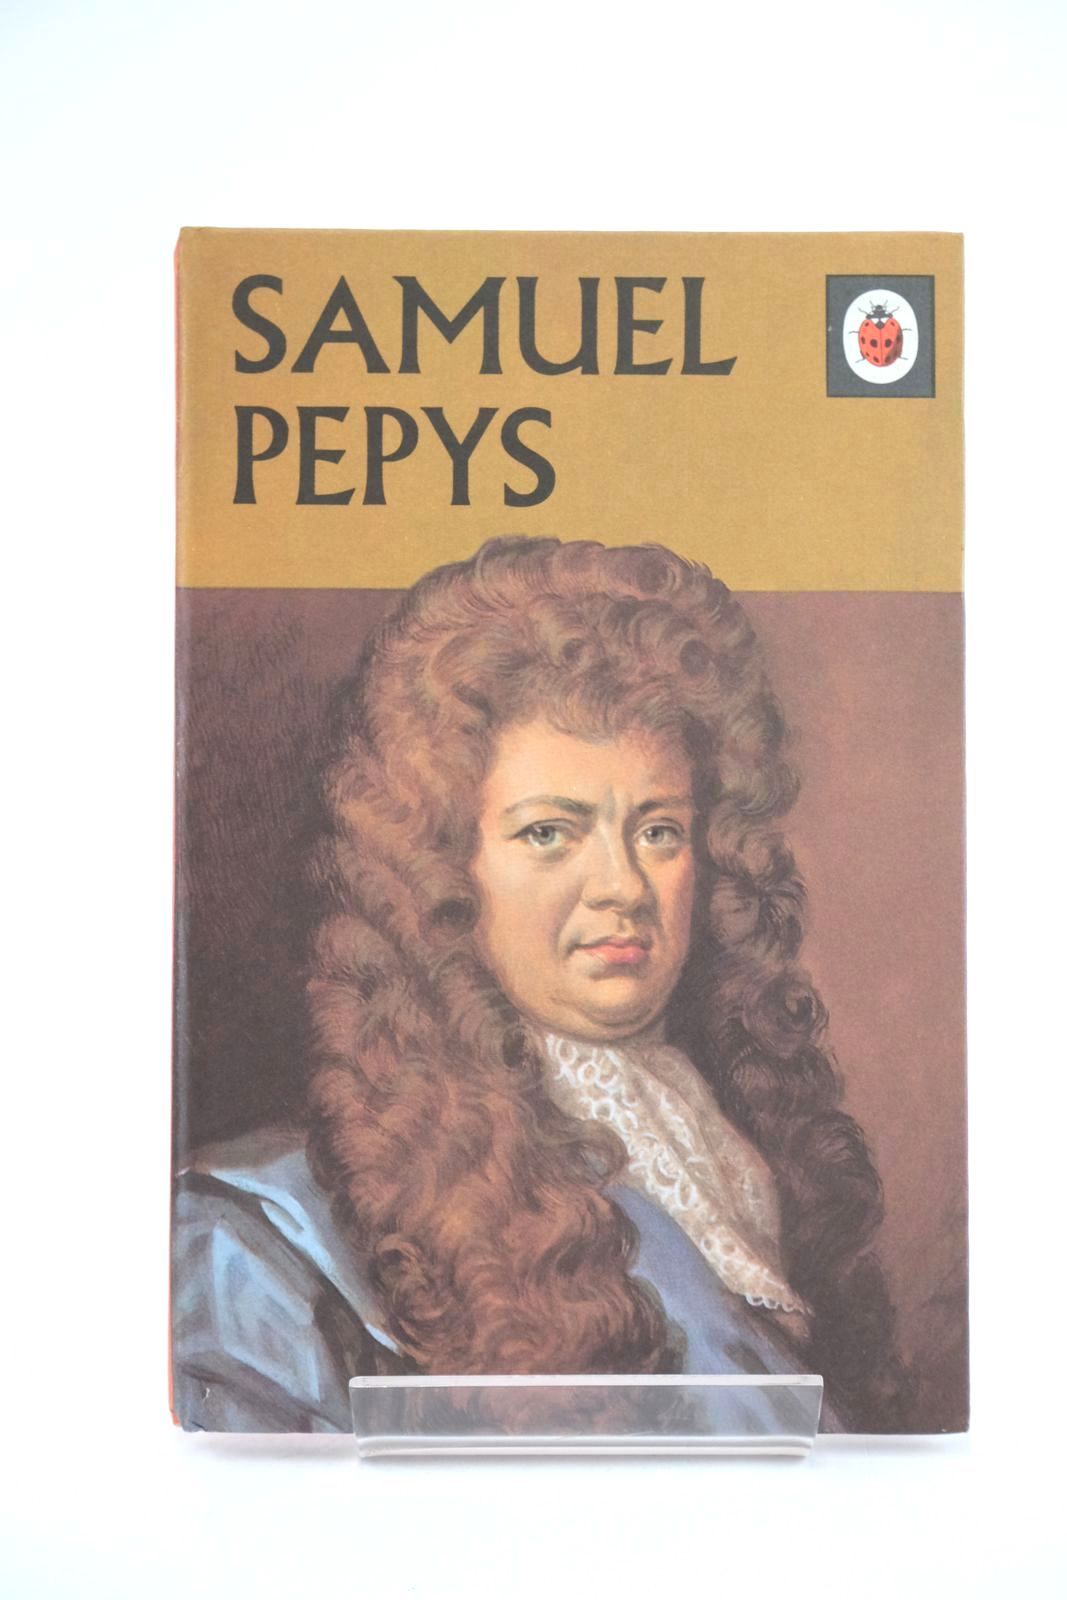 Photo of SAMUEL PEPYS written by Abbott, Nicholas illustrated by Hall, Roger published by Ladybird Books Ltd (STOCK CODE: 1324401)  for sale by Stella & Rose's Books